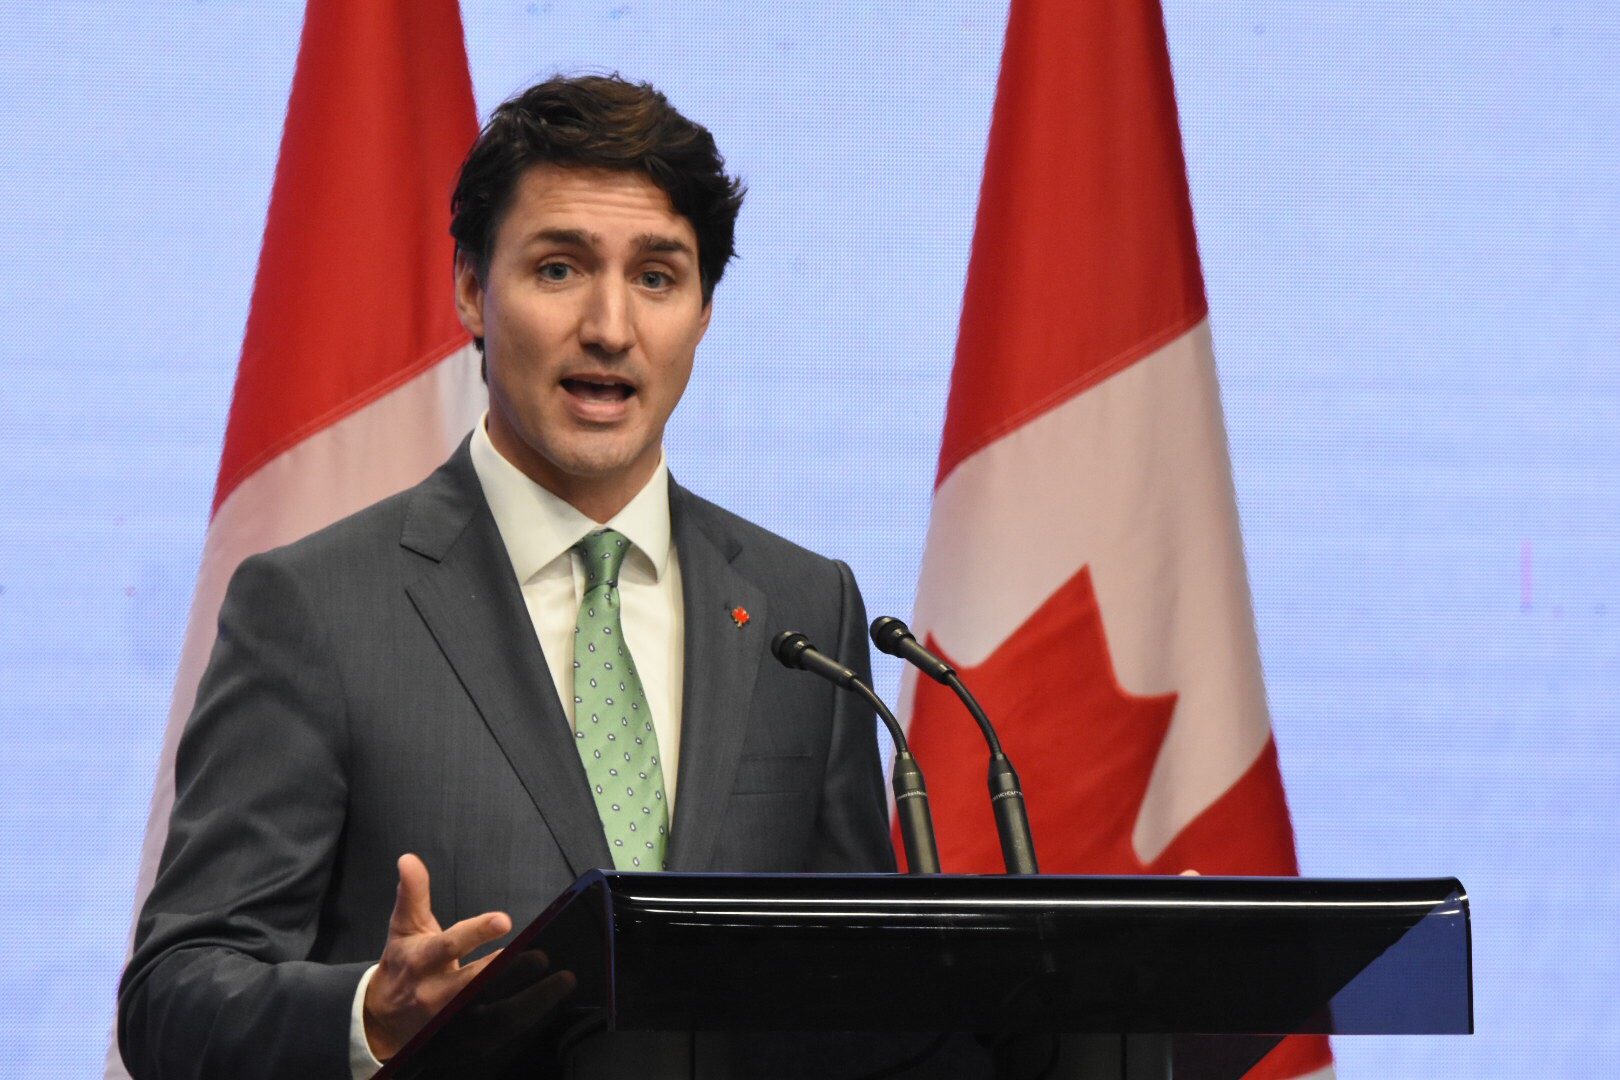 Environmental group slams Trudeau’s ‘inaction’ on Canada trash in PH